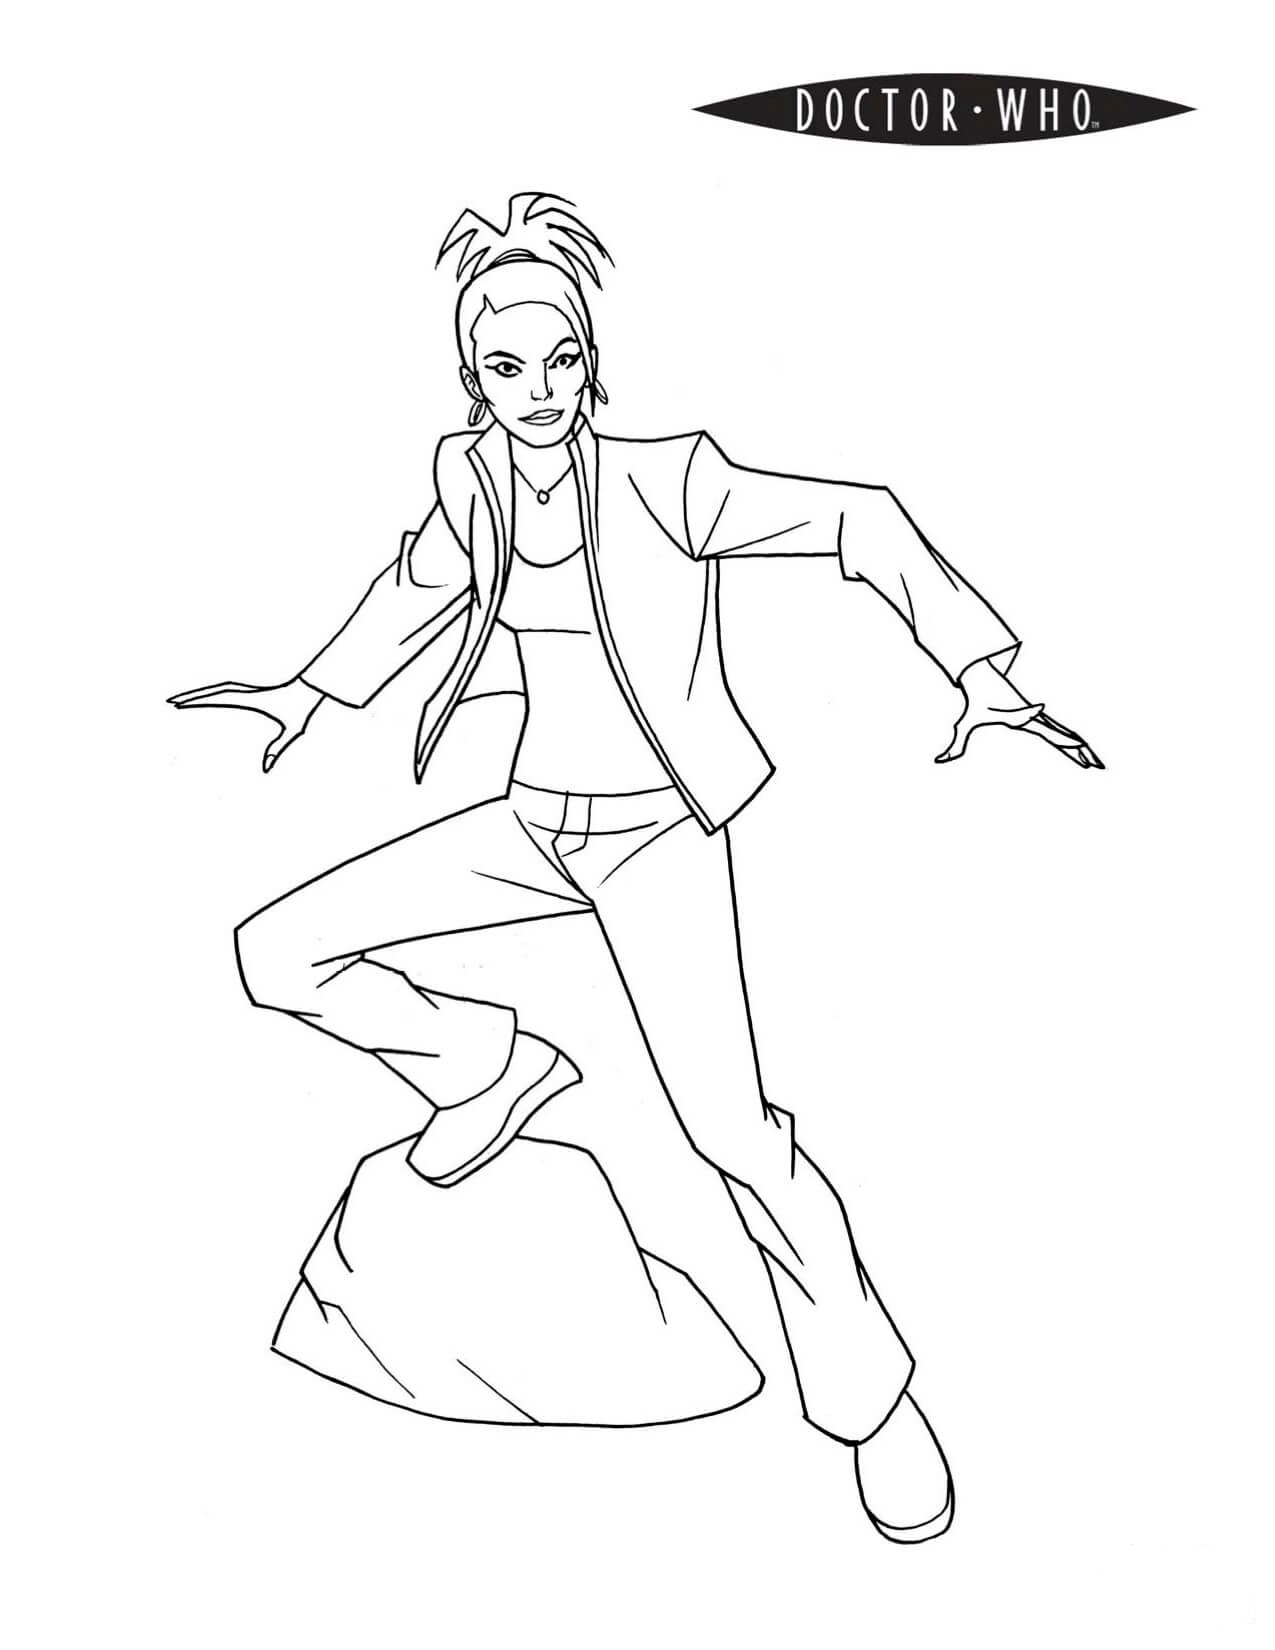 doctor who coloring pages for adults